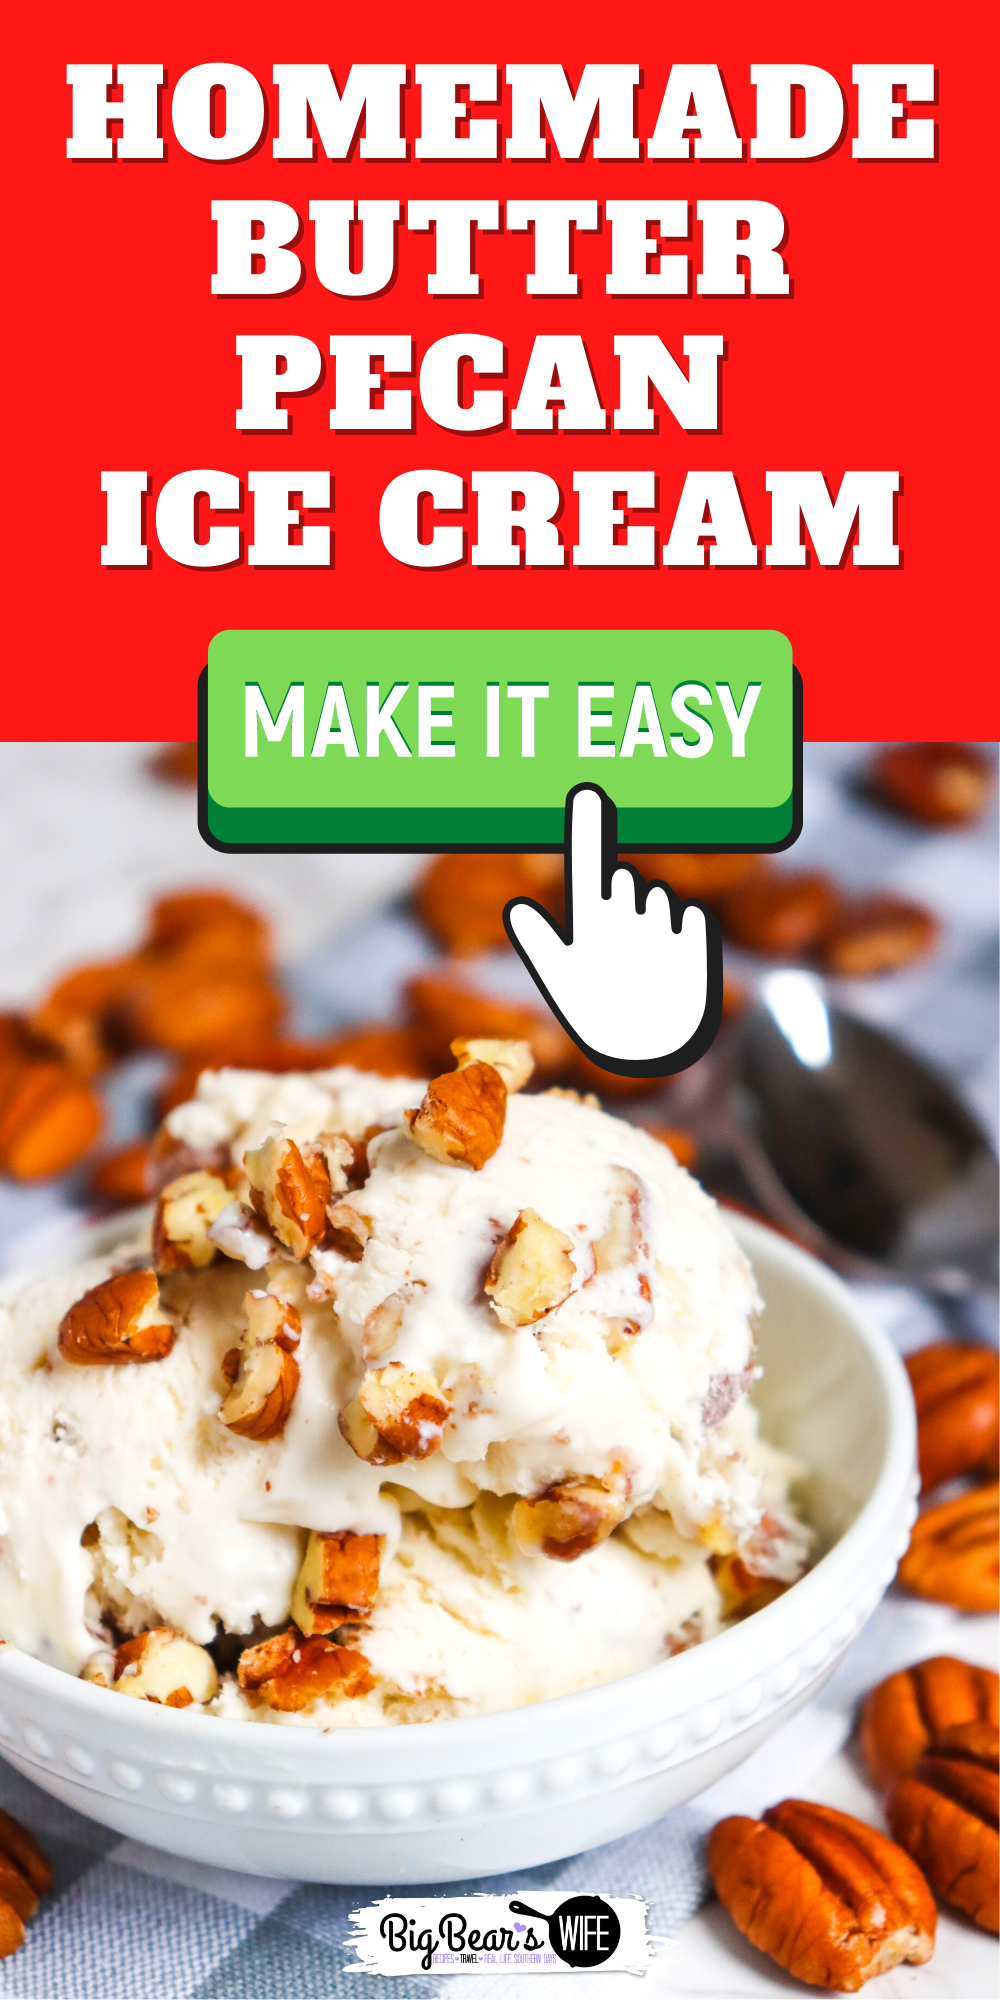 Butter Pecan Ice Cream - Homemade Butter Pecan Ice Cream with a creamy butter vanilla ice cream based filled with toasted buttered pecans!  via @bigbearswife